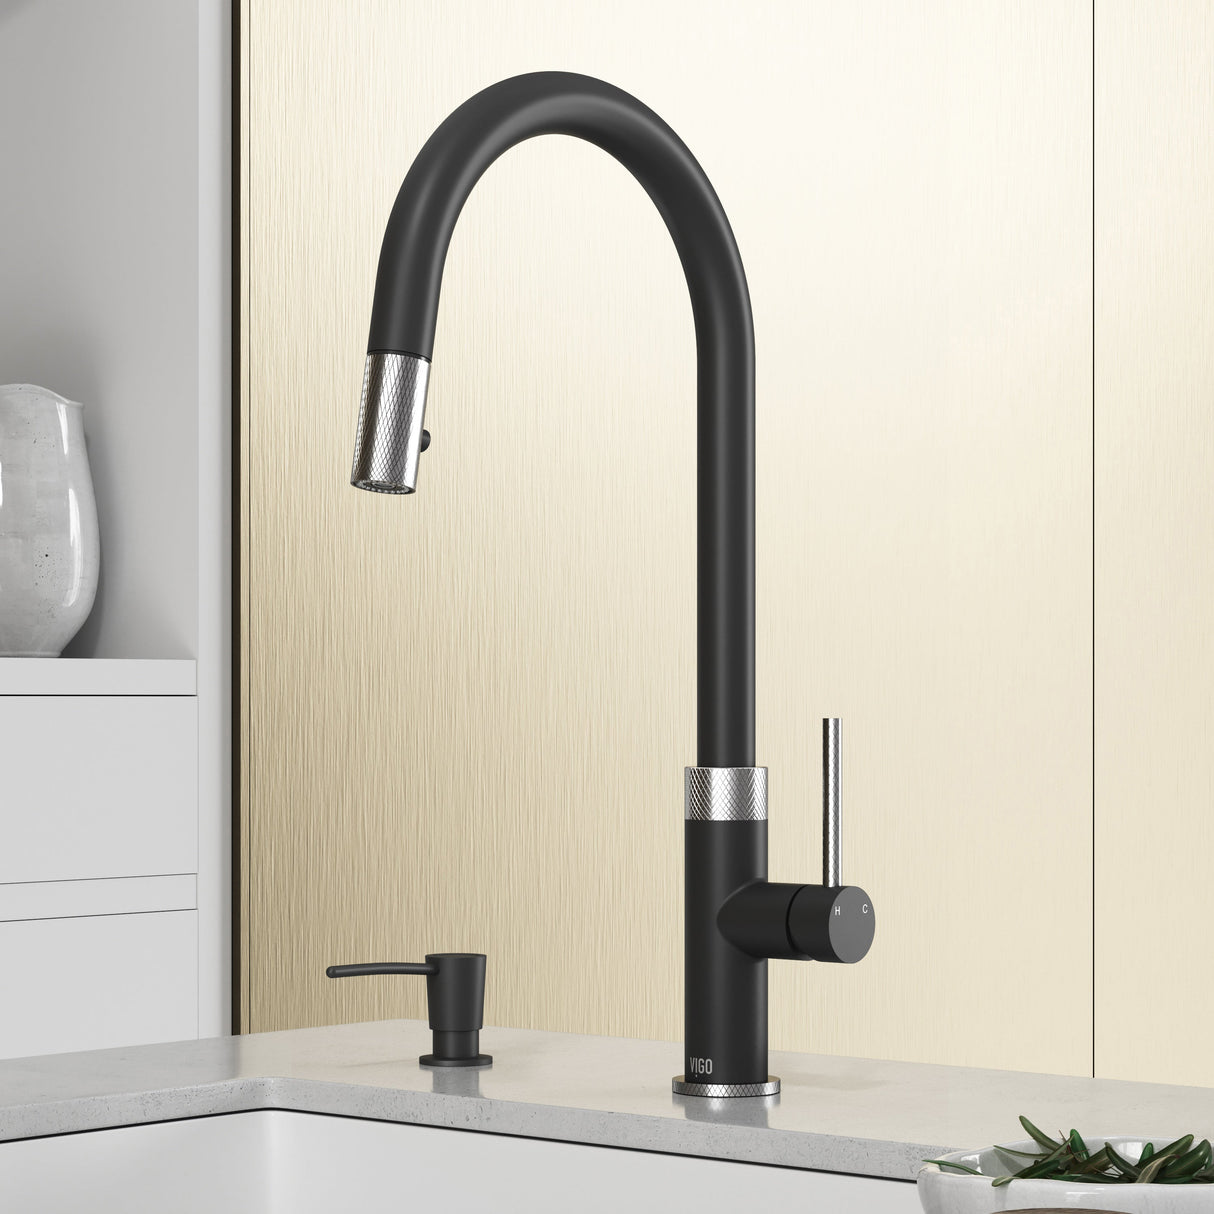 VIGO Bristol Pull-Down Kitchen Faucet with Soap Dispenser in Stainless Steel and Matte Black VG02033STMBK2